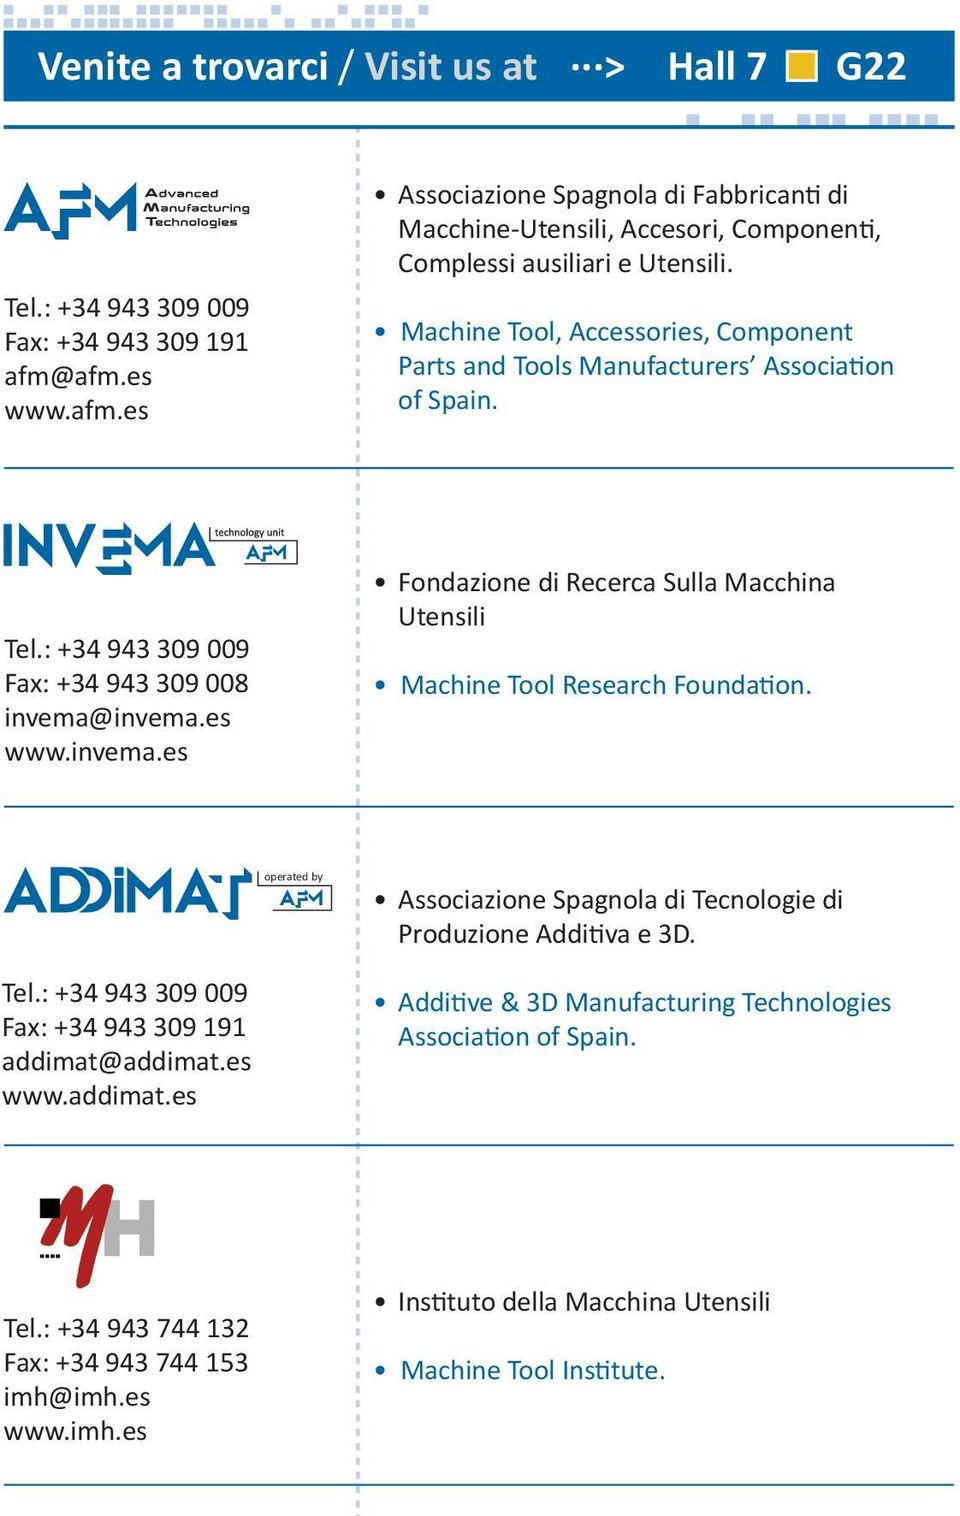 Machine Tool, Accessories, Component Parts and Tools Manufacturers Association of Spain. Tel.: +34 943 309 009 Fax: +34 943 309 008 invema@